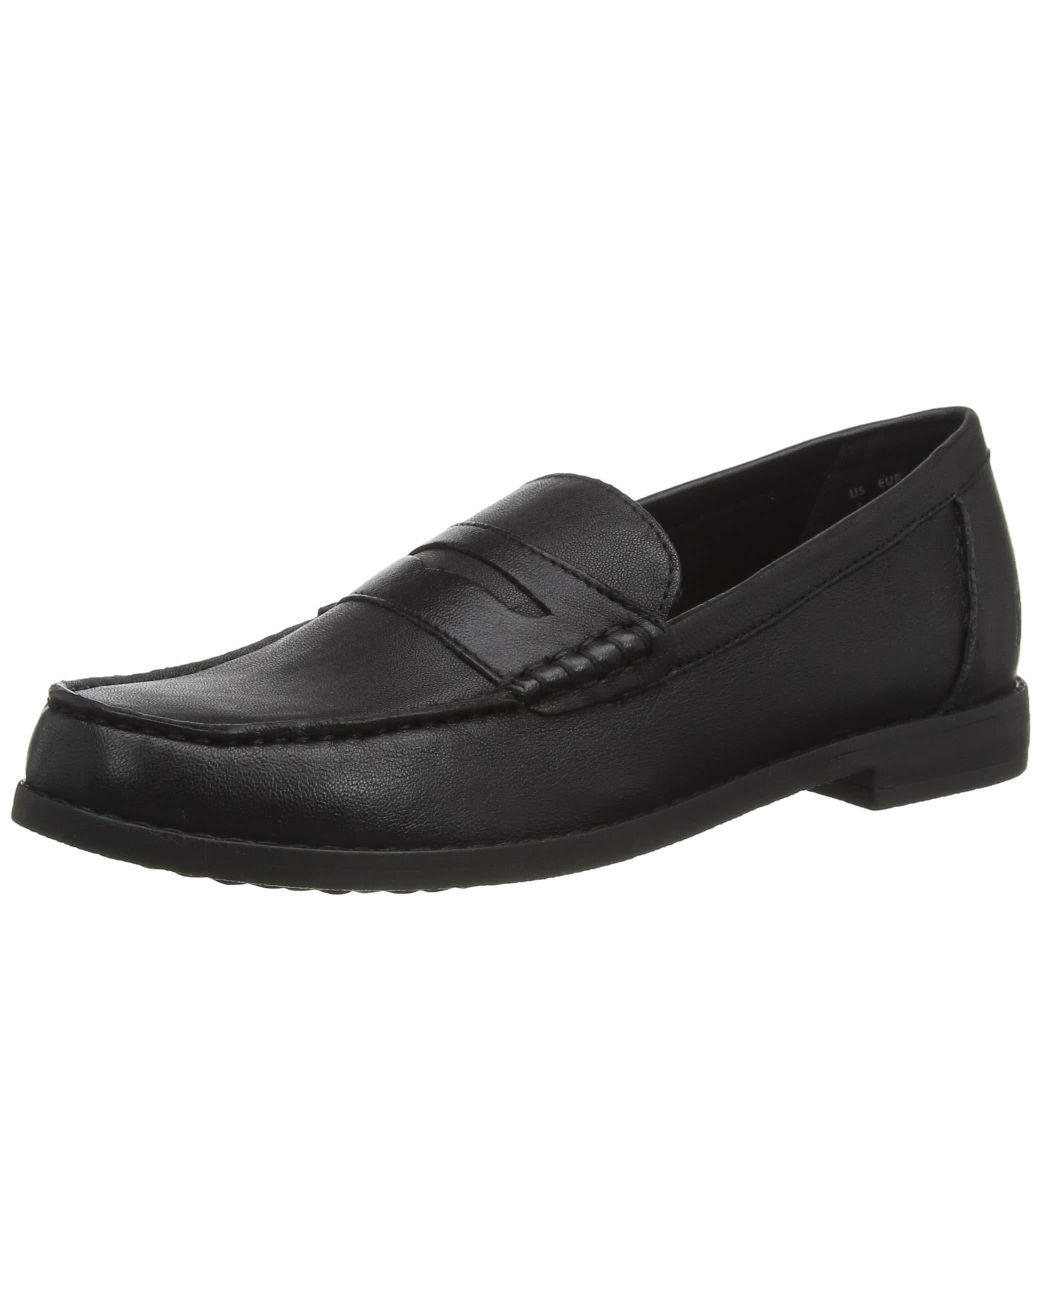 Hush Puppies Leather Wren Loafer in Black Leather (Black) - Save 30% - Lyst